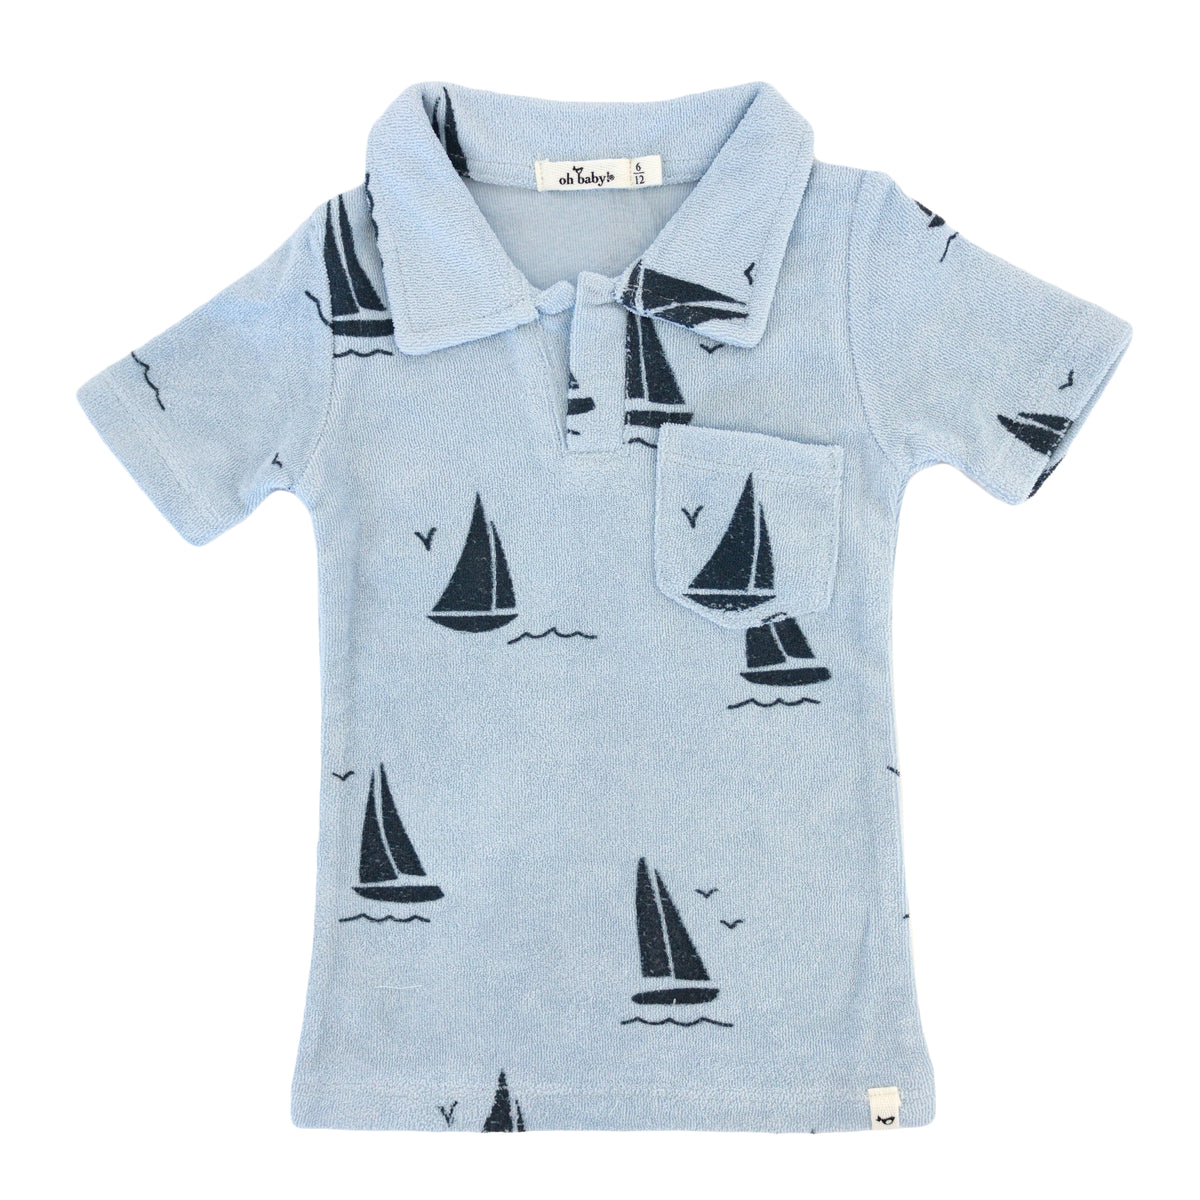 oh baby! Cotton Terry Polo Shirt - Sailboat Print - Sky Blue